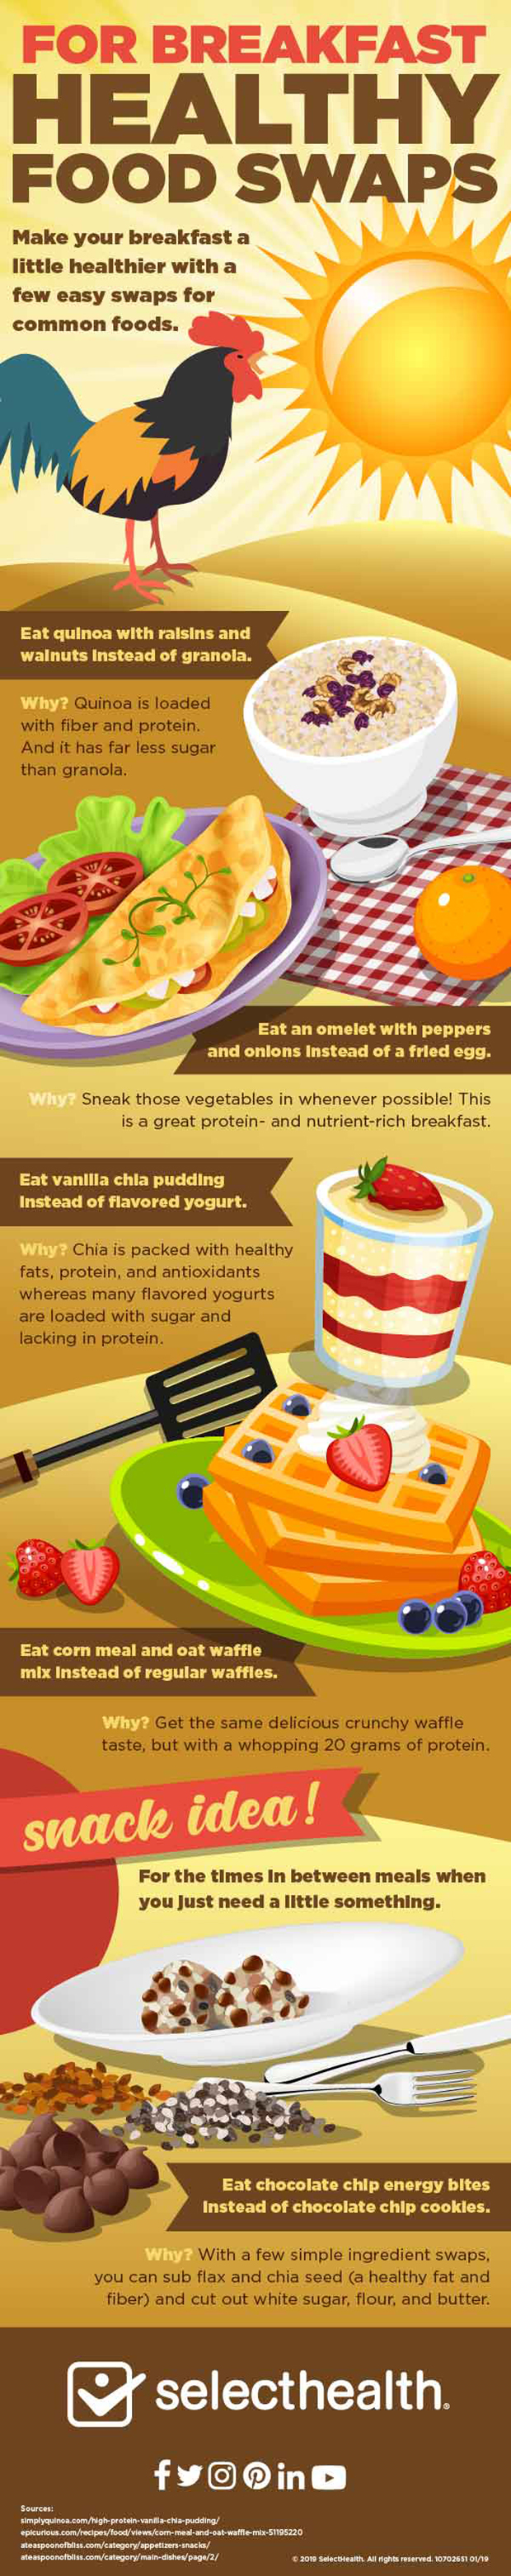 Infographic illustrating healthy food swaps for breakfast